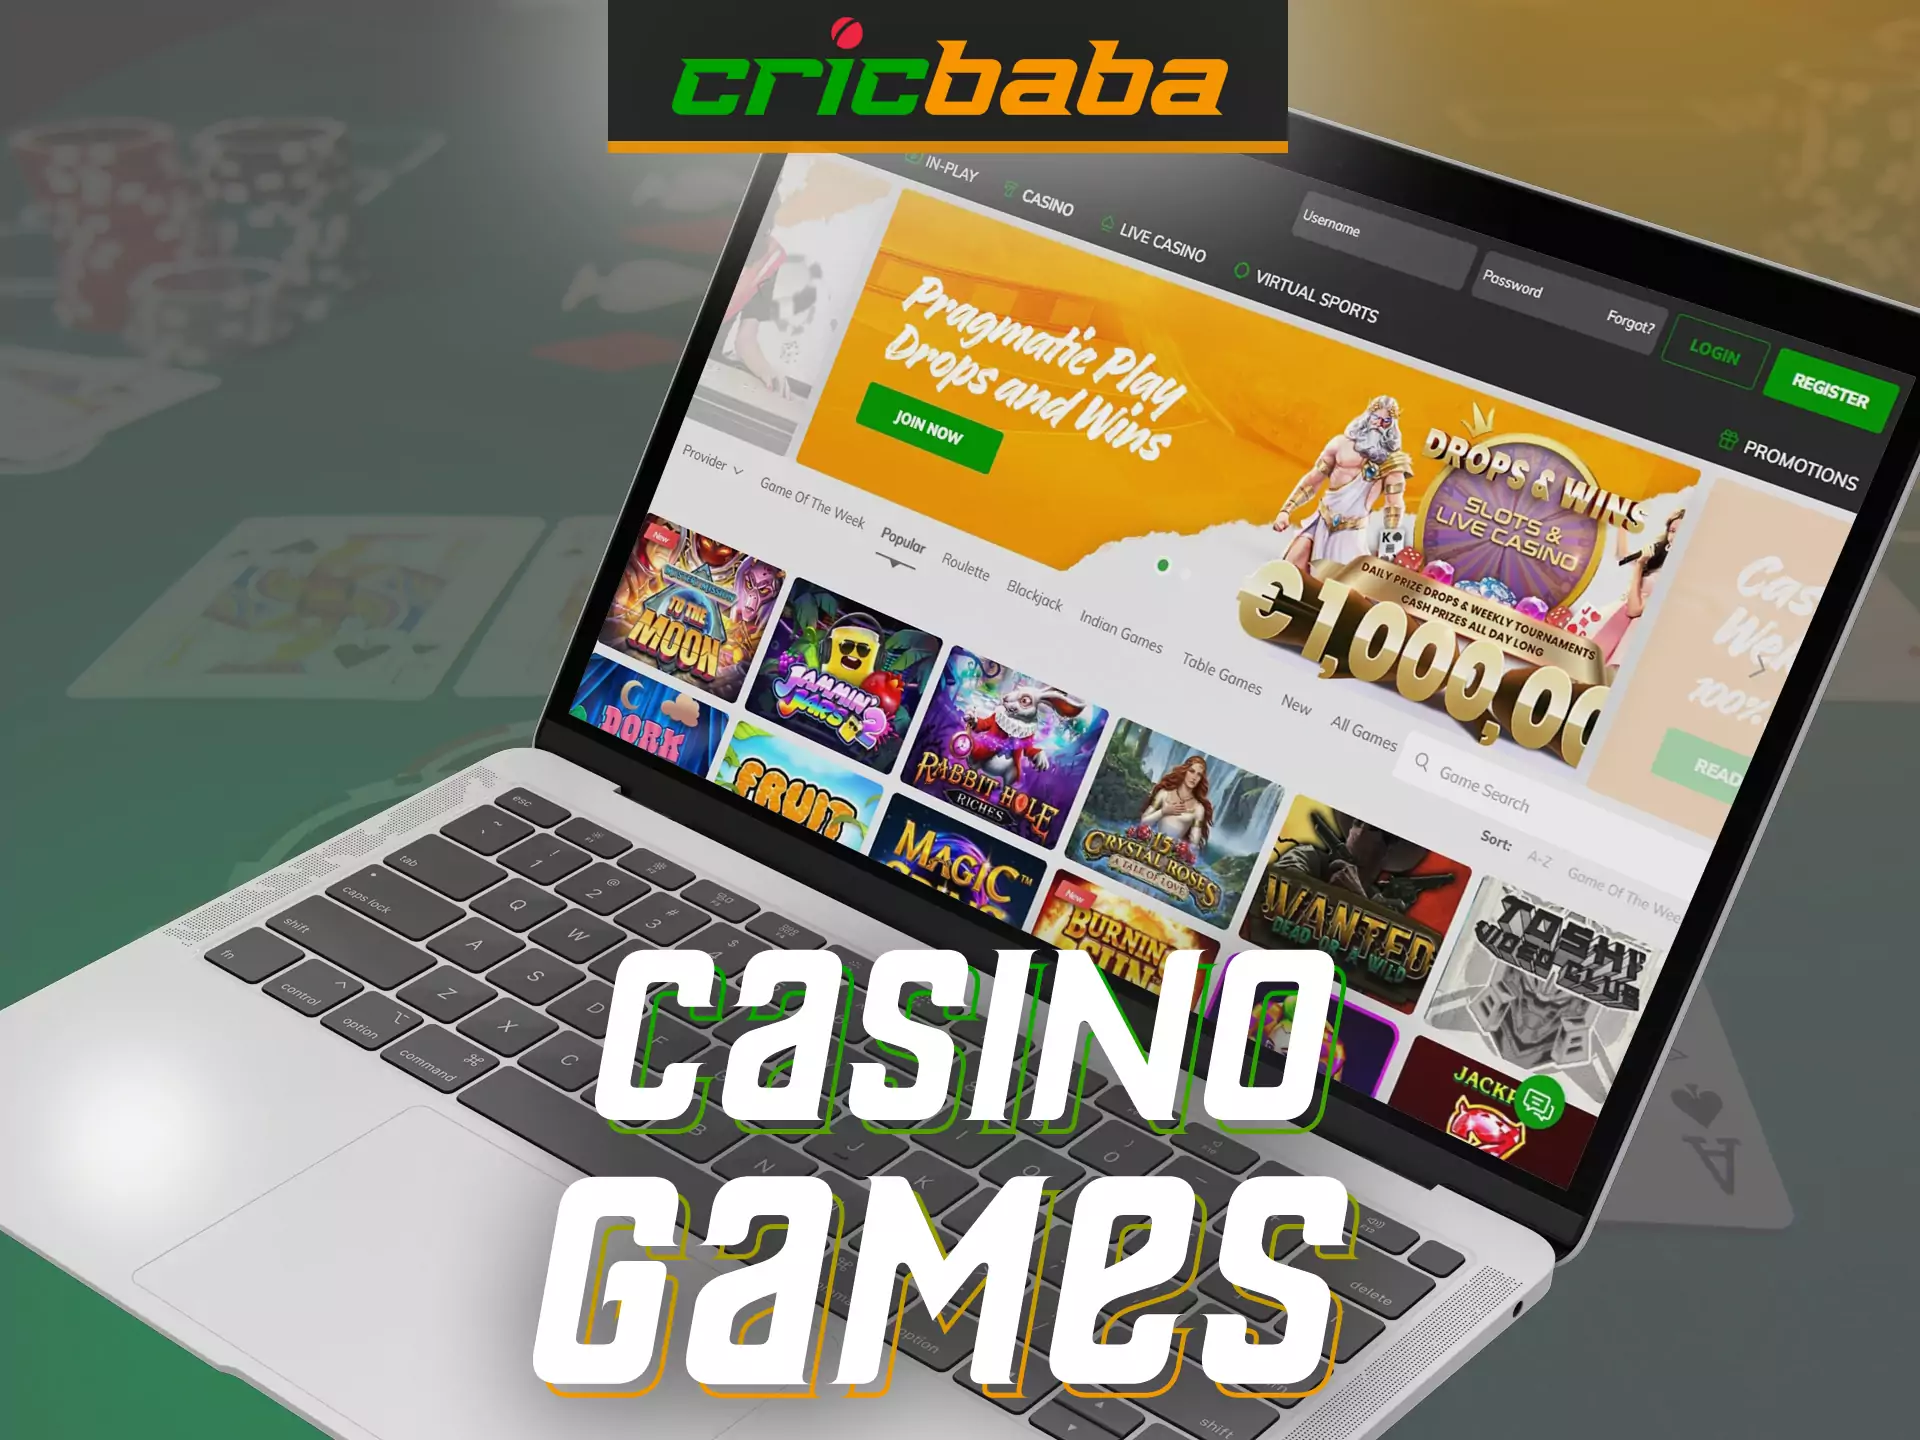 Try different games at Cricbaba casino, find the most interesting ones for yourself.